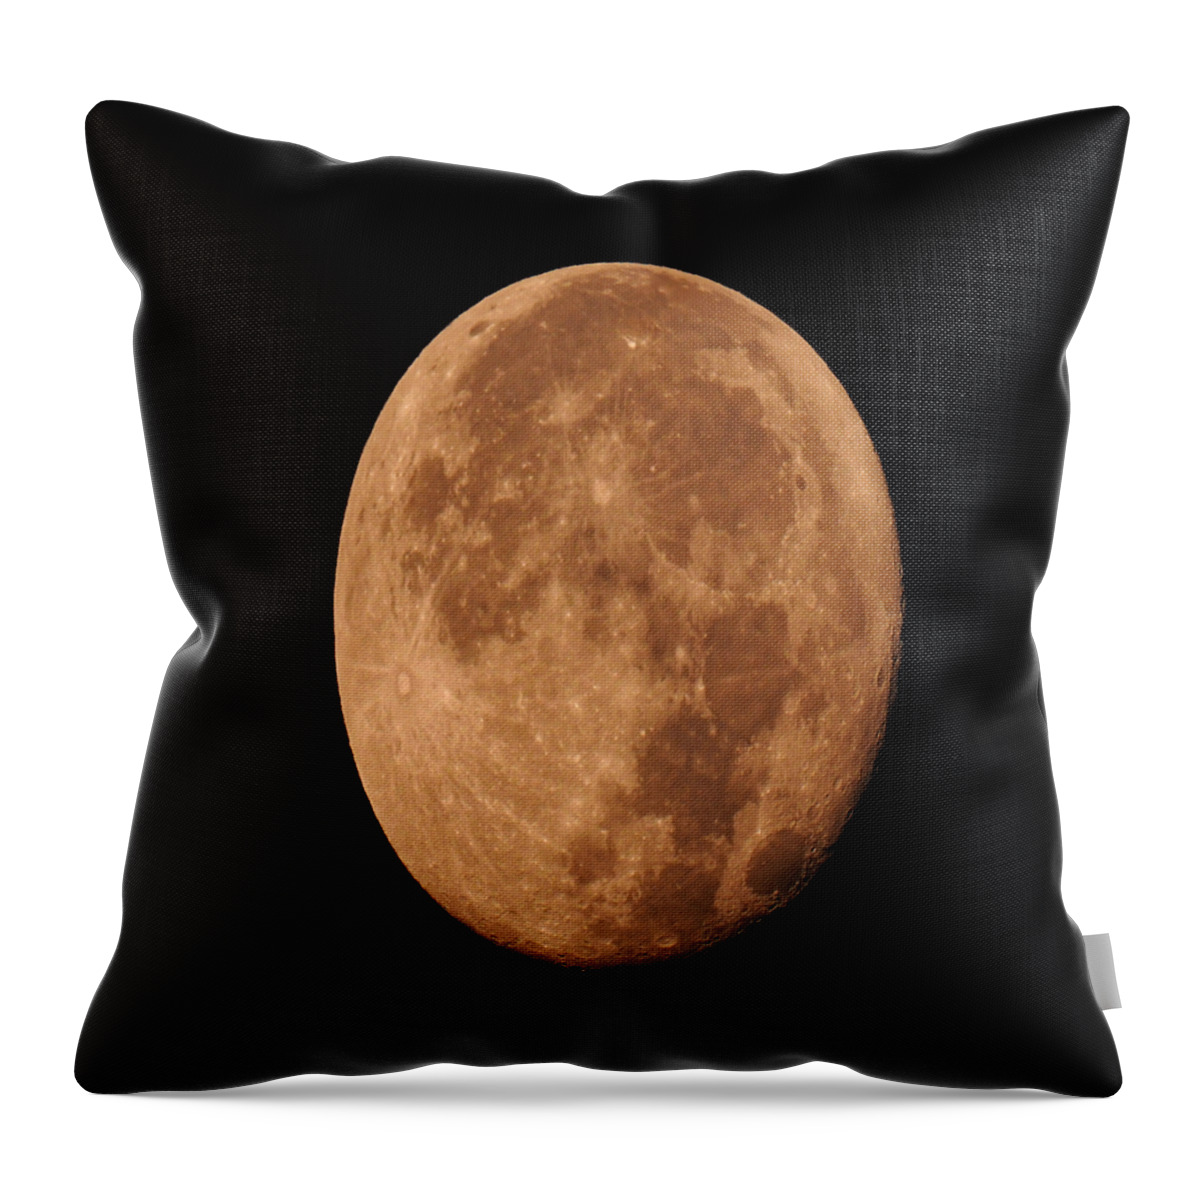 Magnificent Throw Pillow featuring the photograph Magnificent Harvest Moon by Beth Myer Photography